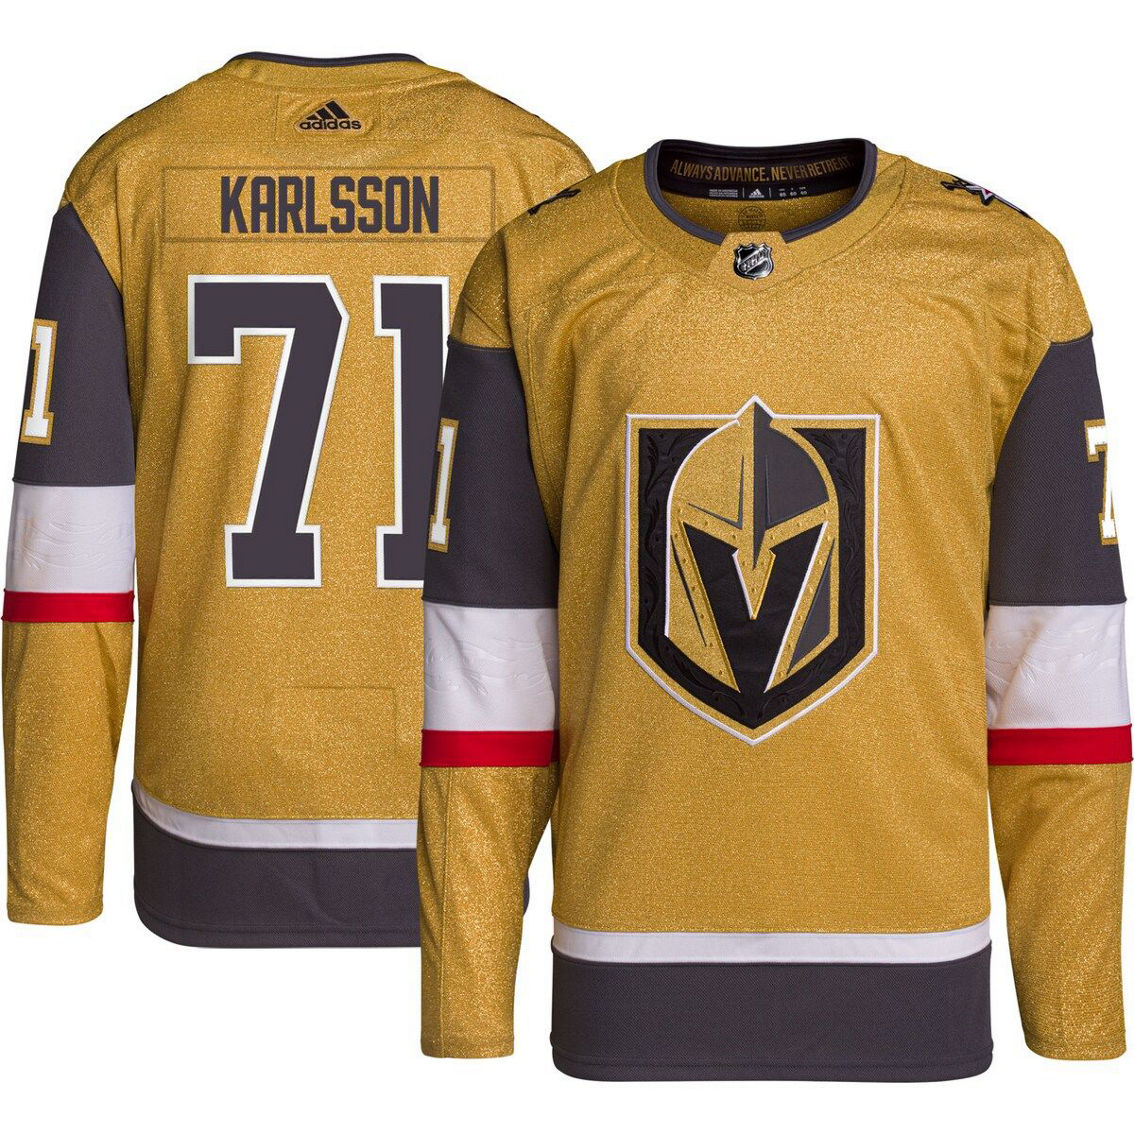 adidas Men's William Karlsson Gold Vegas Golden Knights Primegreen Authentic Pro Player Jersey - Image 2 of 4